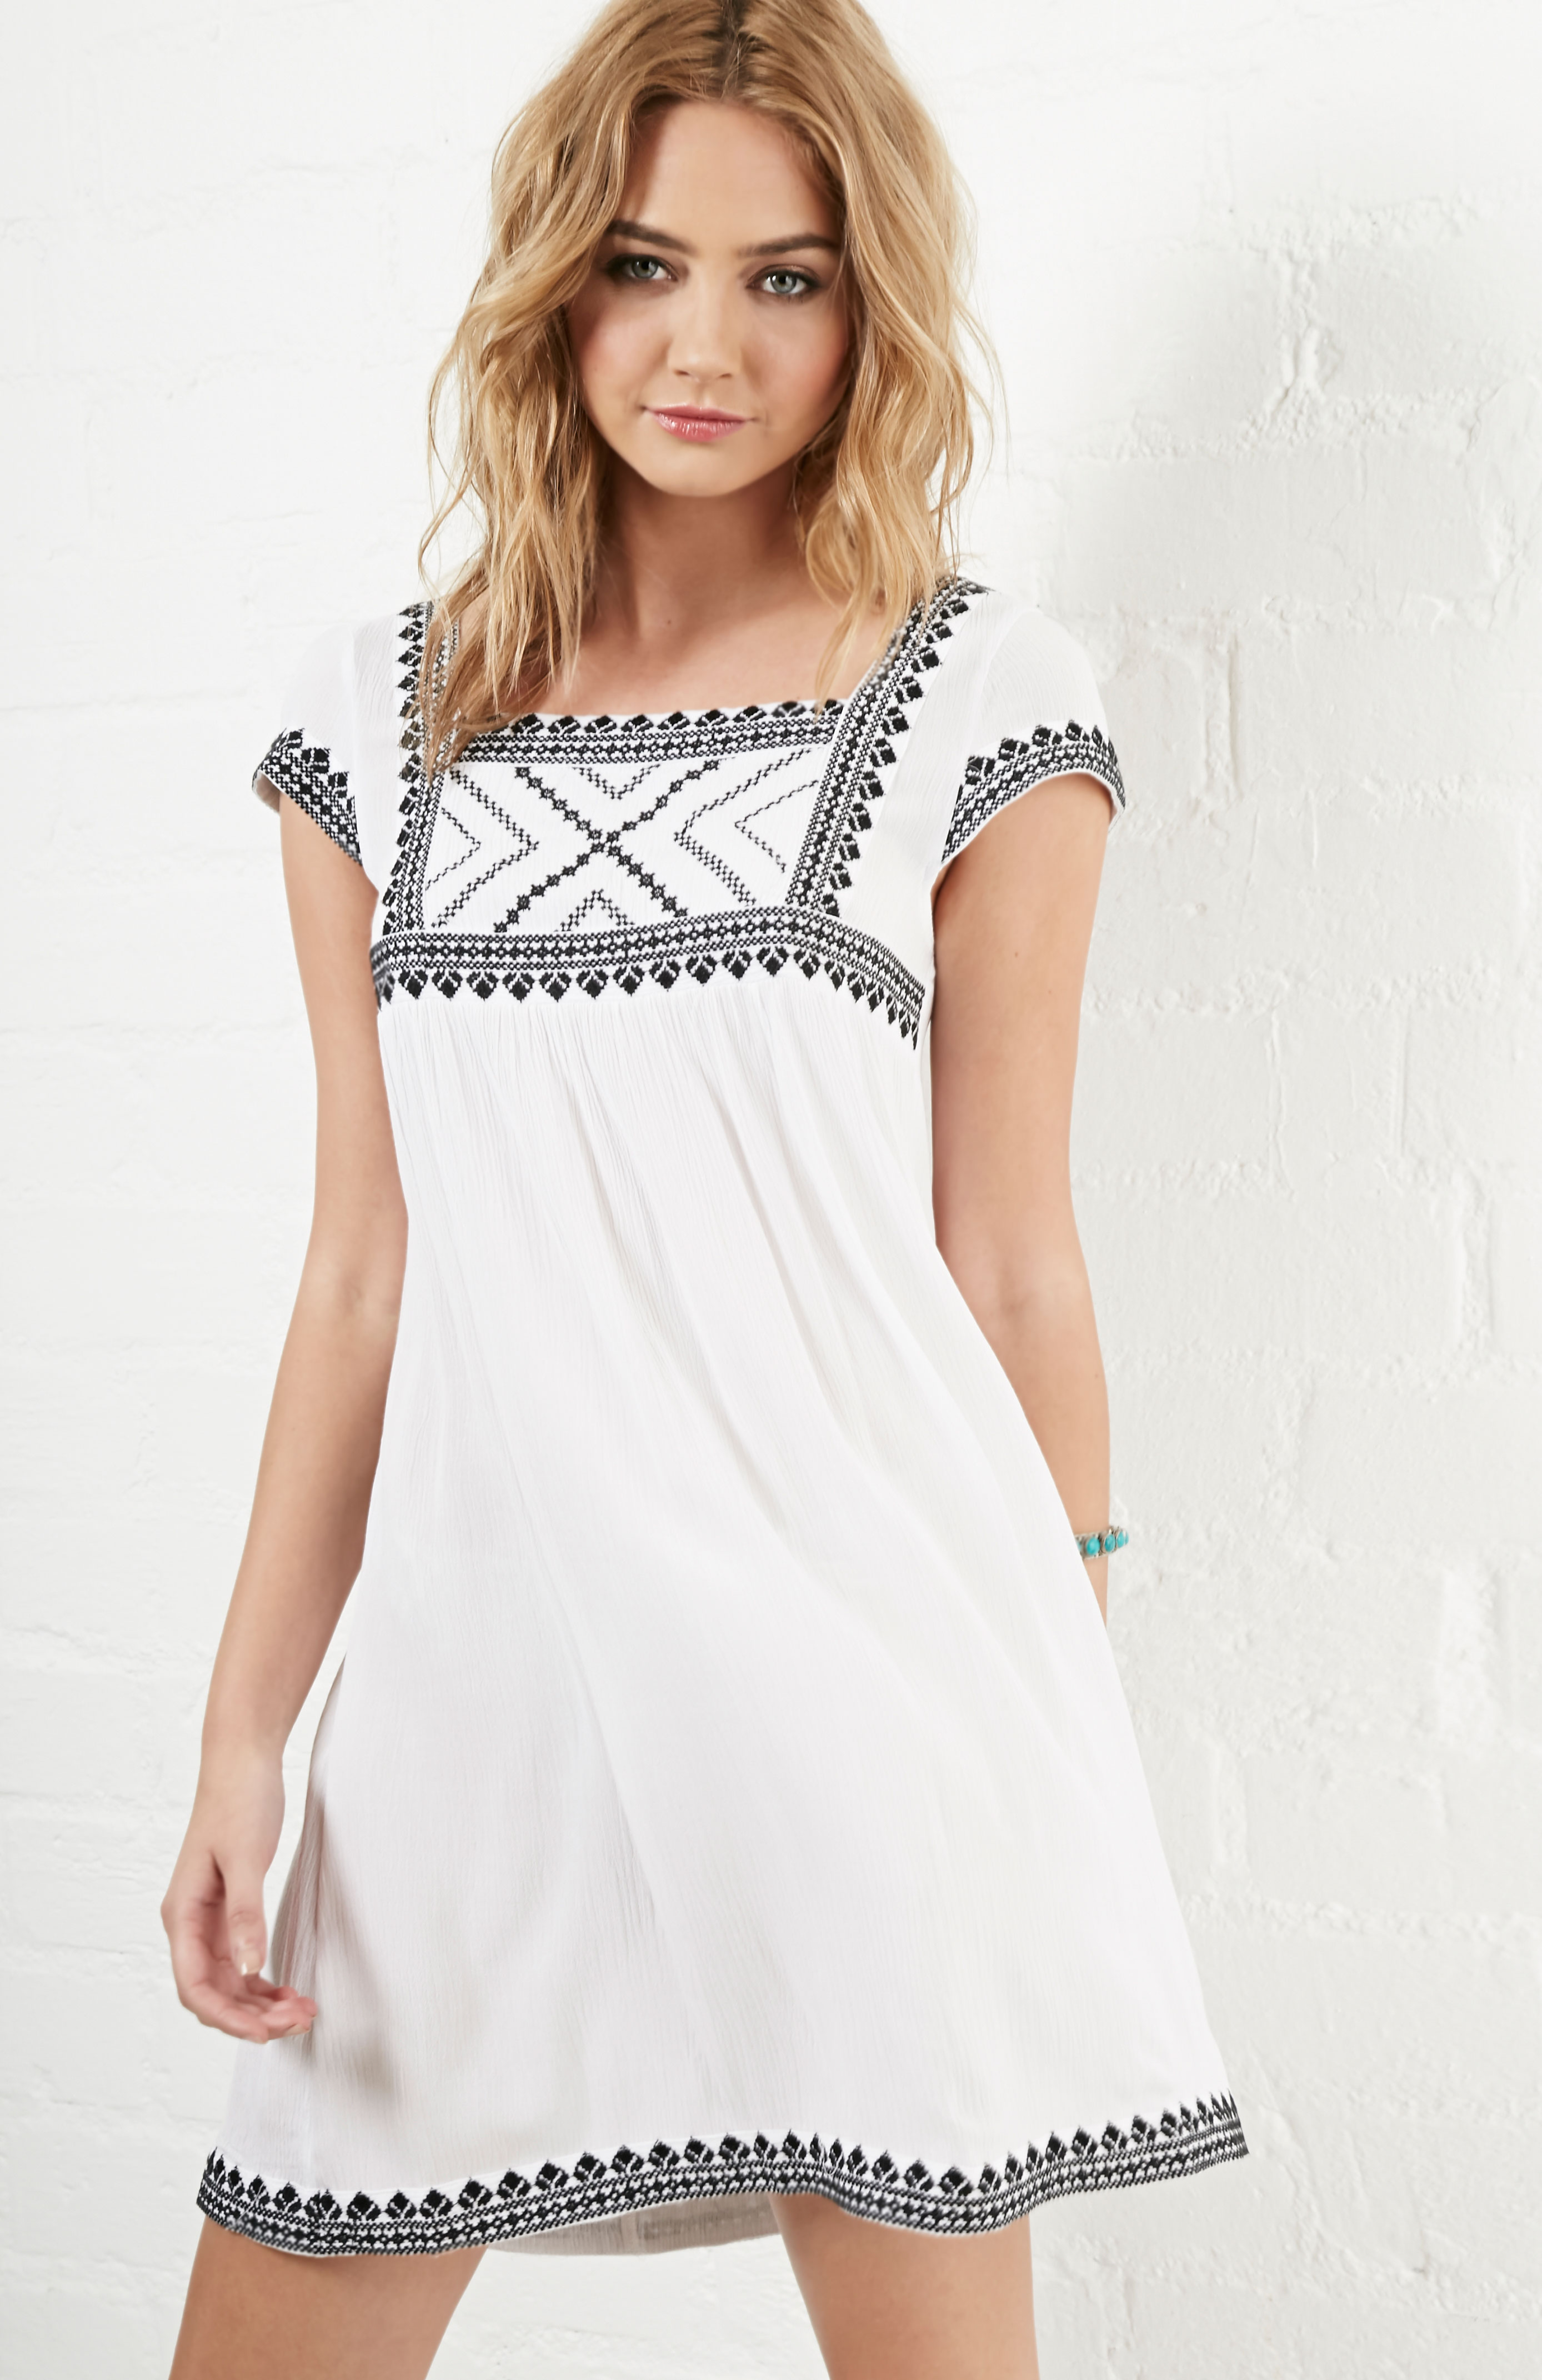 Glamorous Embroidered Dress in White/Black | DAILYLOOK